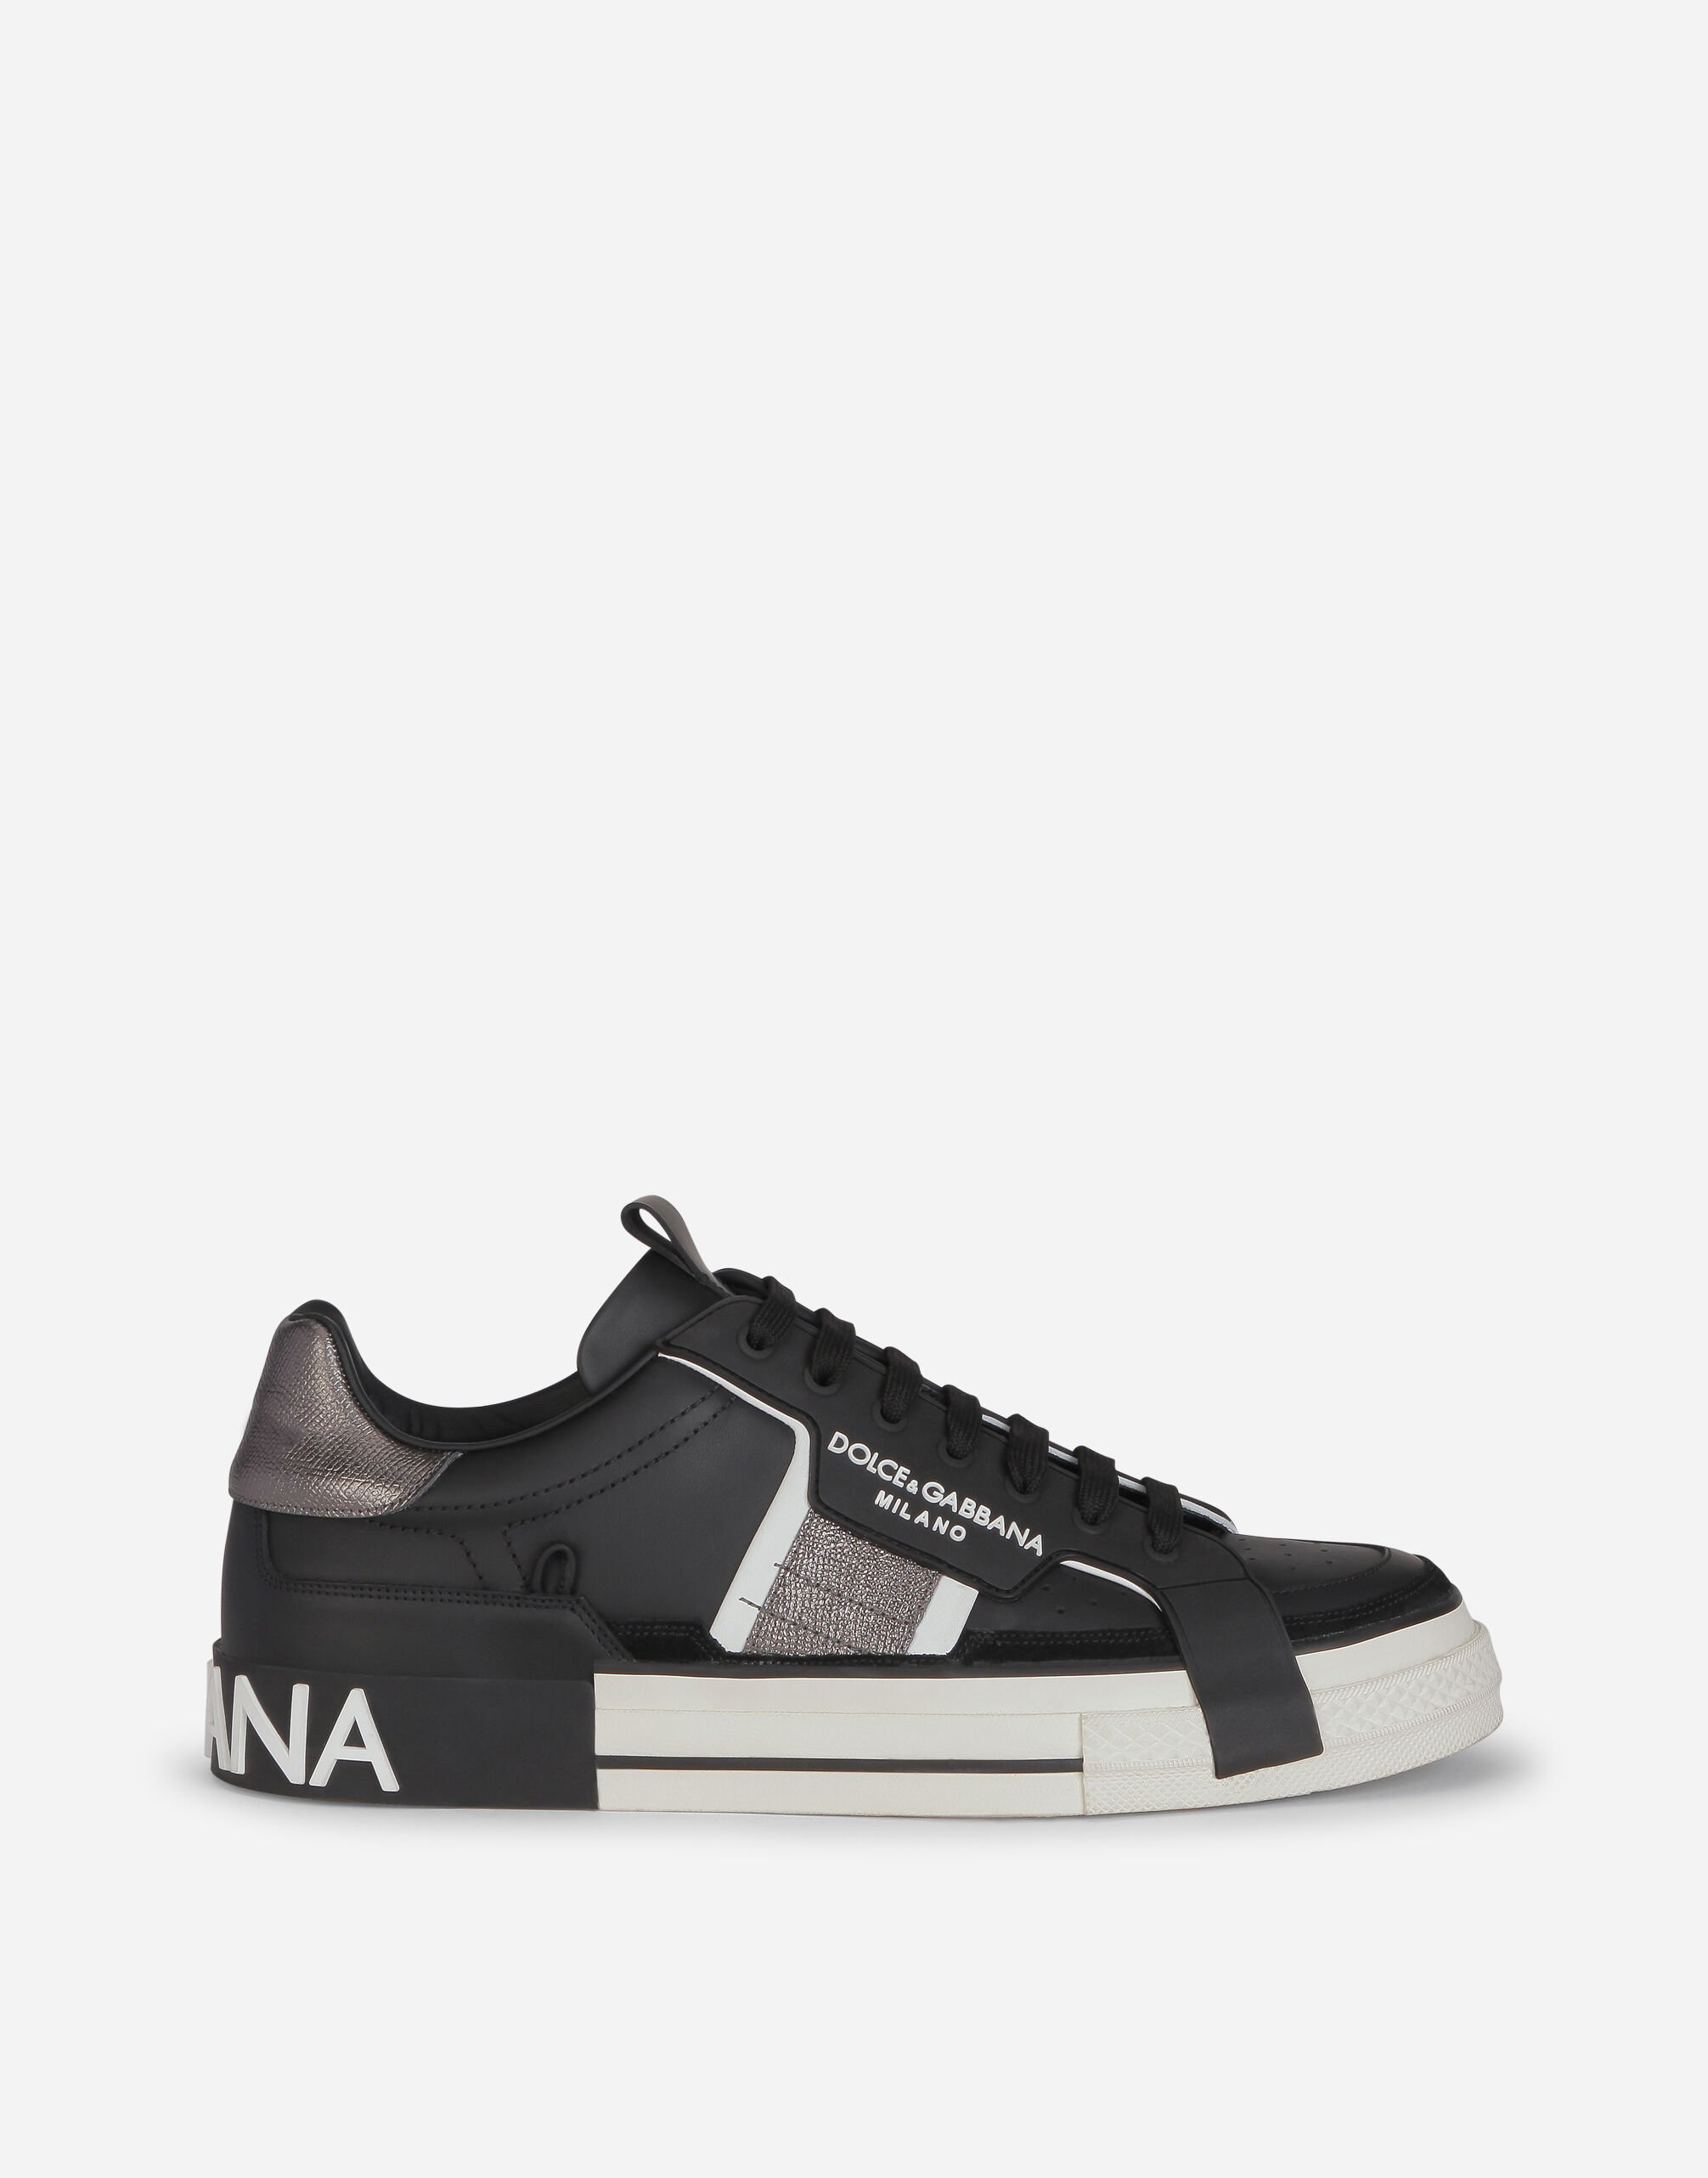 ${brand} Calfskin 2.Zero Custom sneakers with contrasting details ${colorDescription} ${masterID}